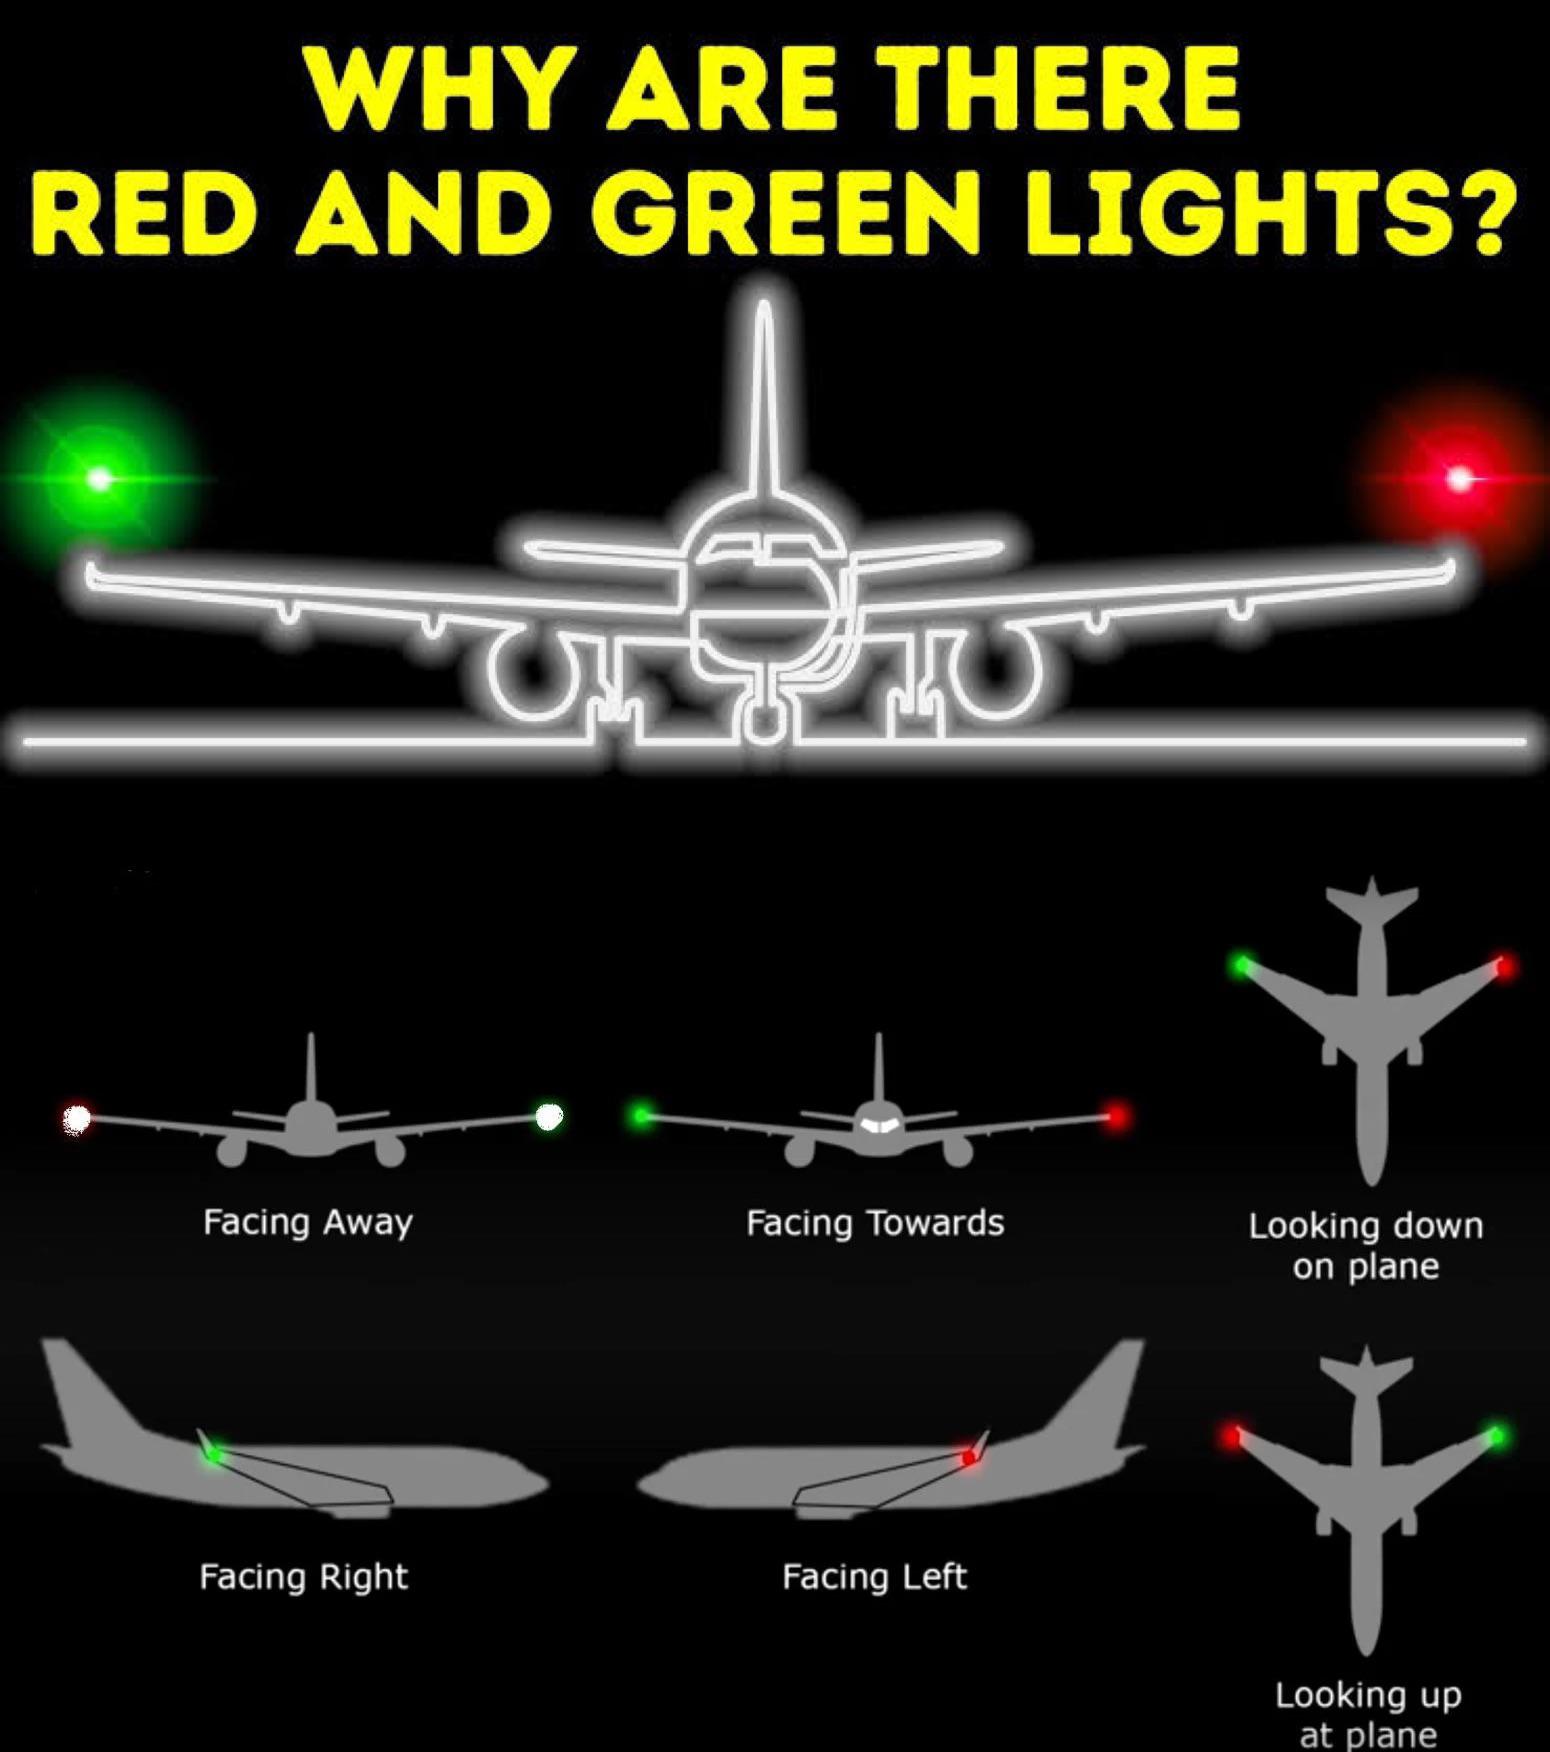 infographics and charts - airplane lights meaning - Why Are There Red And Green Lights? Facing Away Facing Right pan Facing Towards Facing Left Looking down on plane Looking up at plane